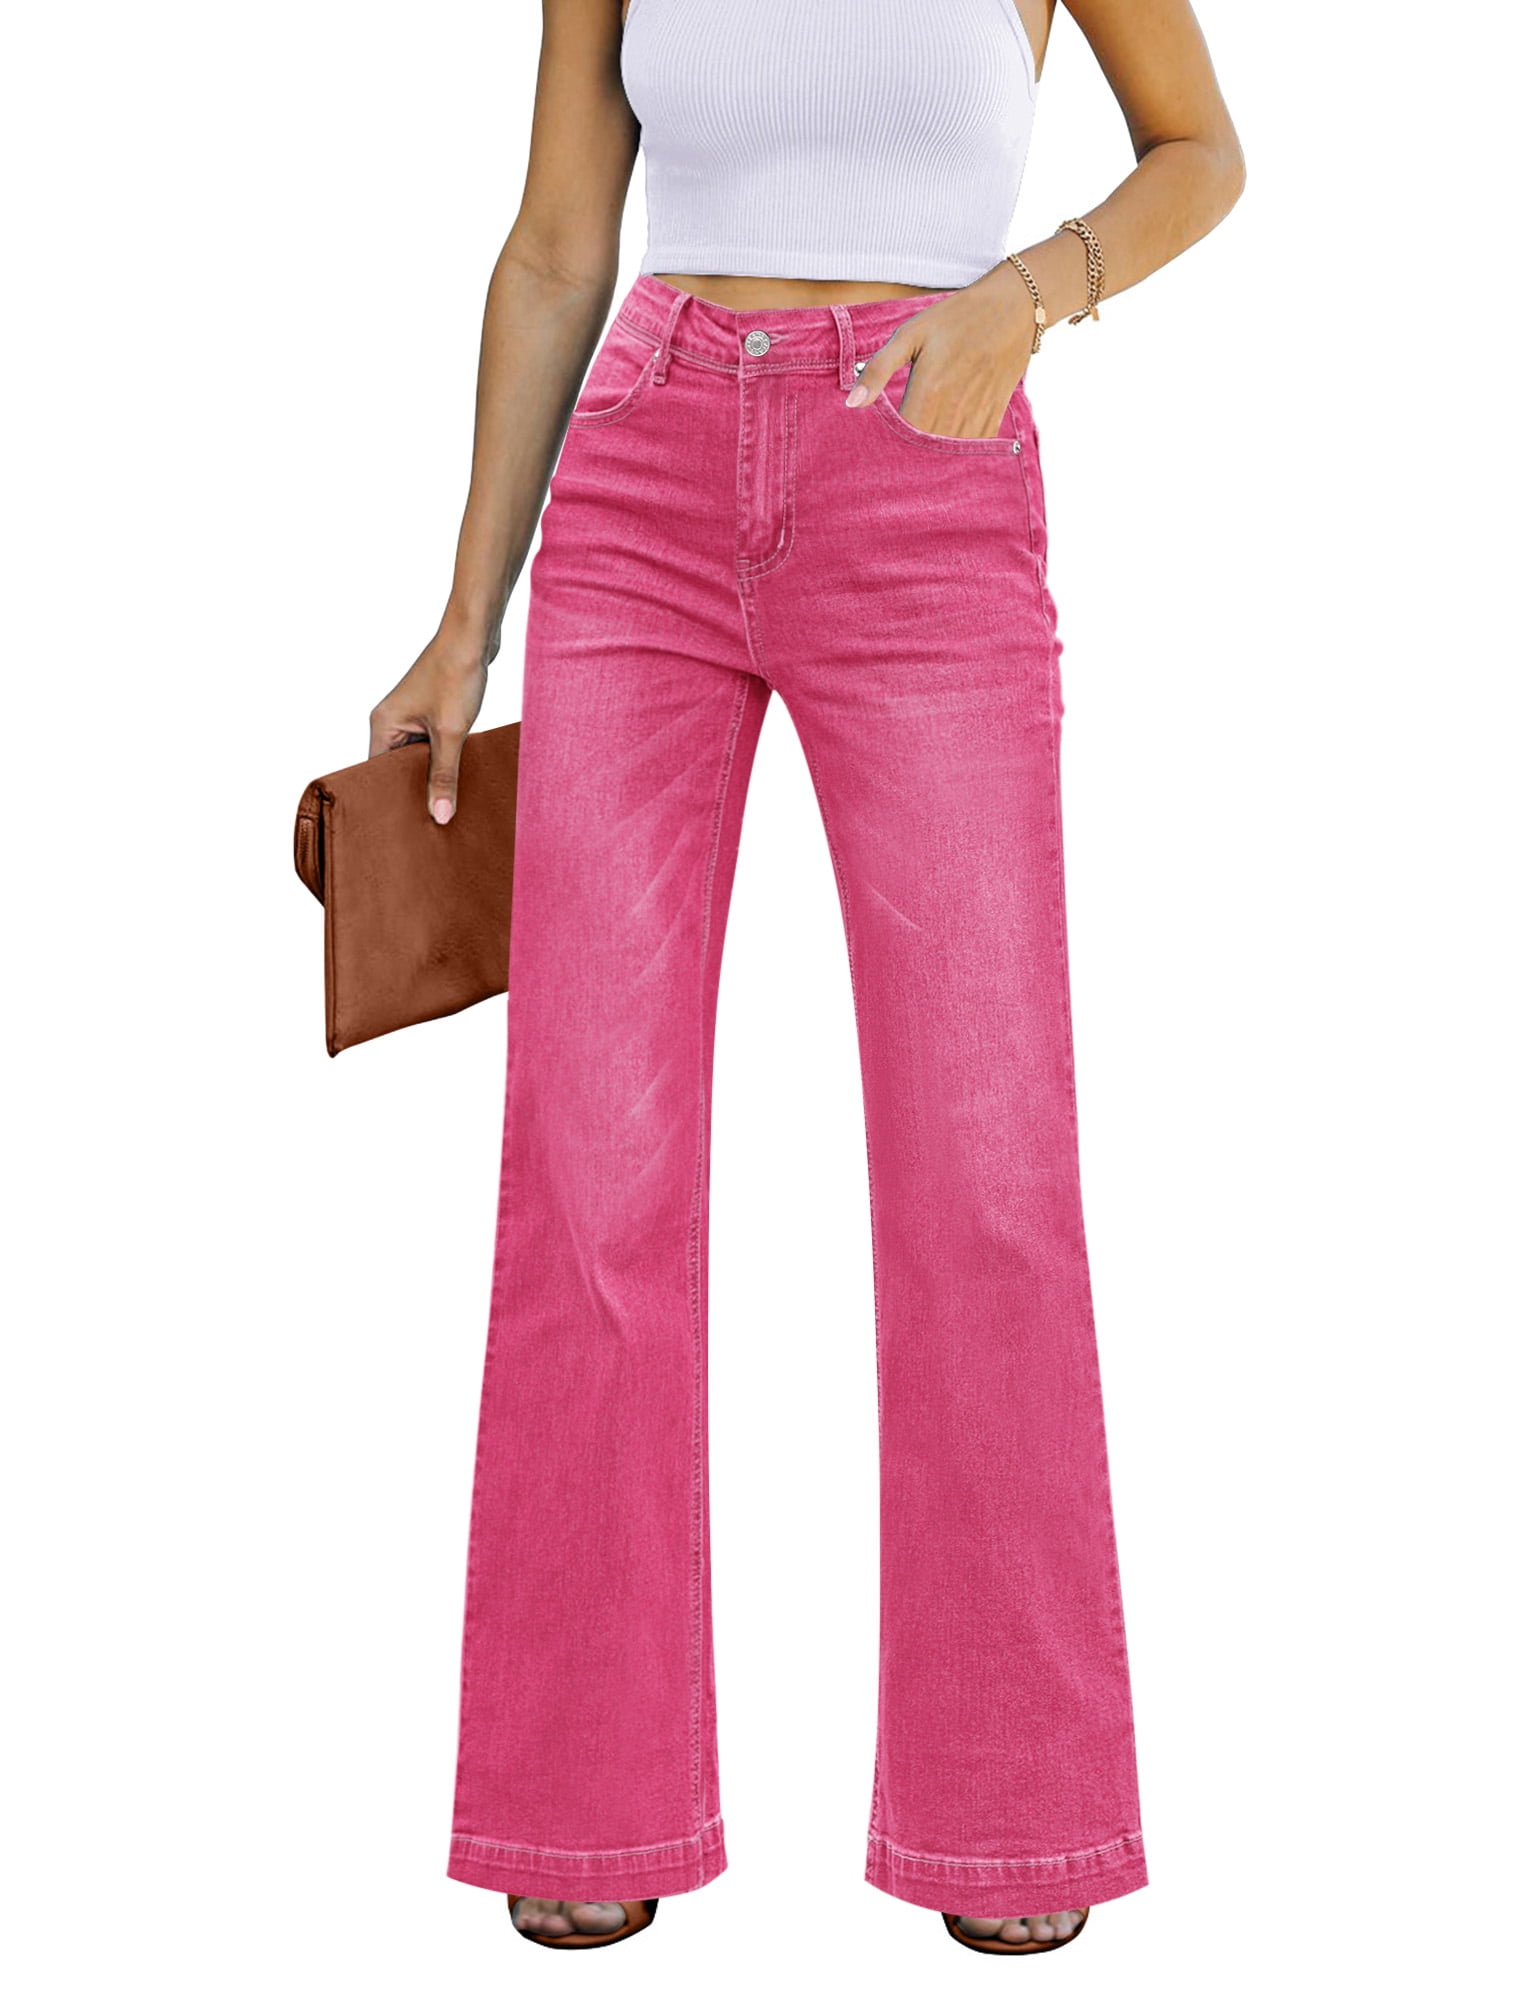 Bright Pink Textured High Waist Skinny Flare Pants